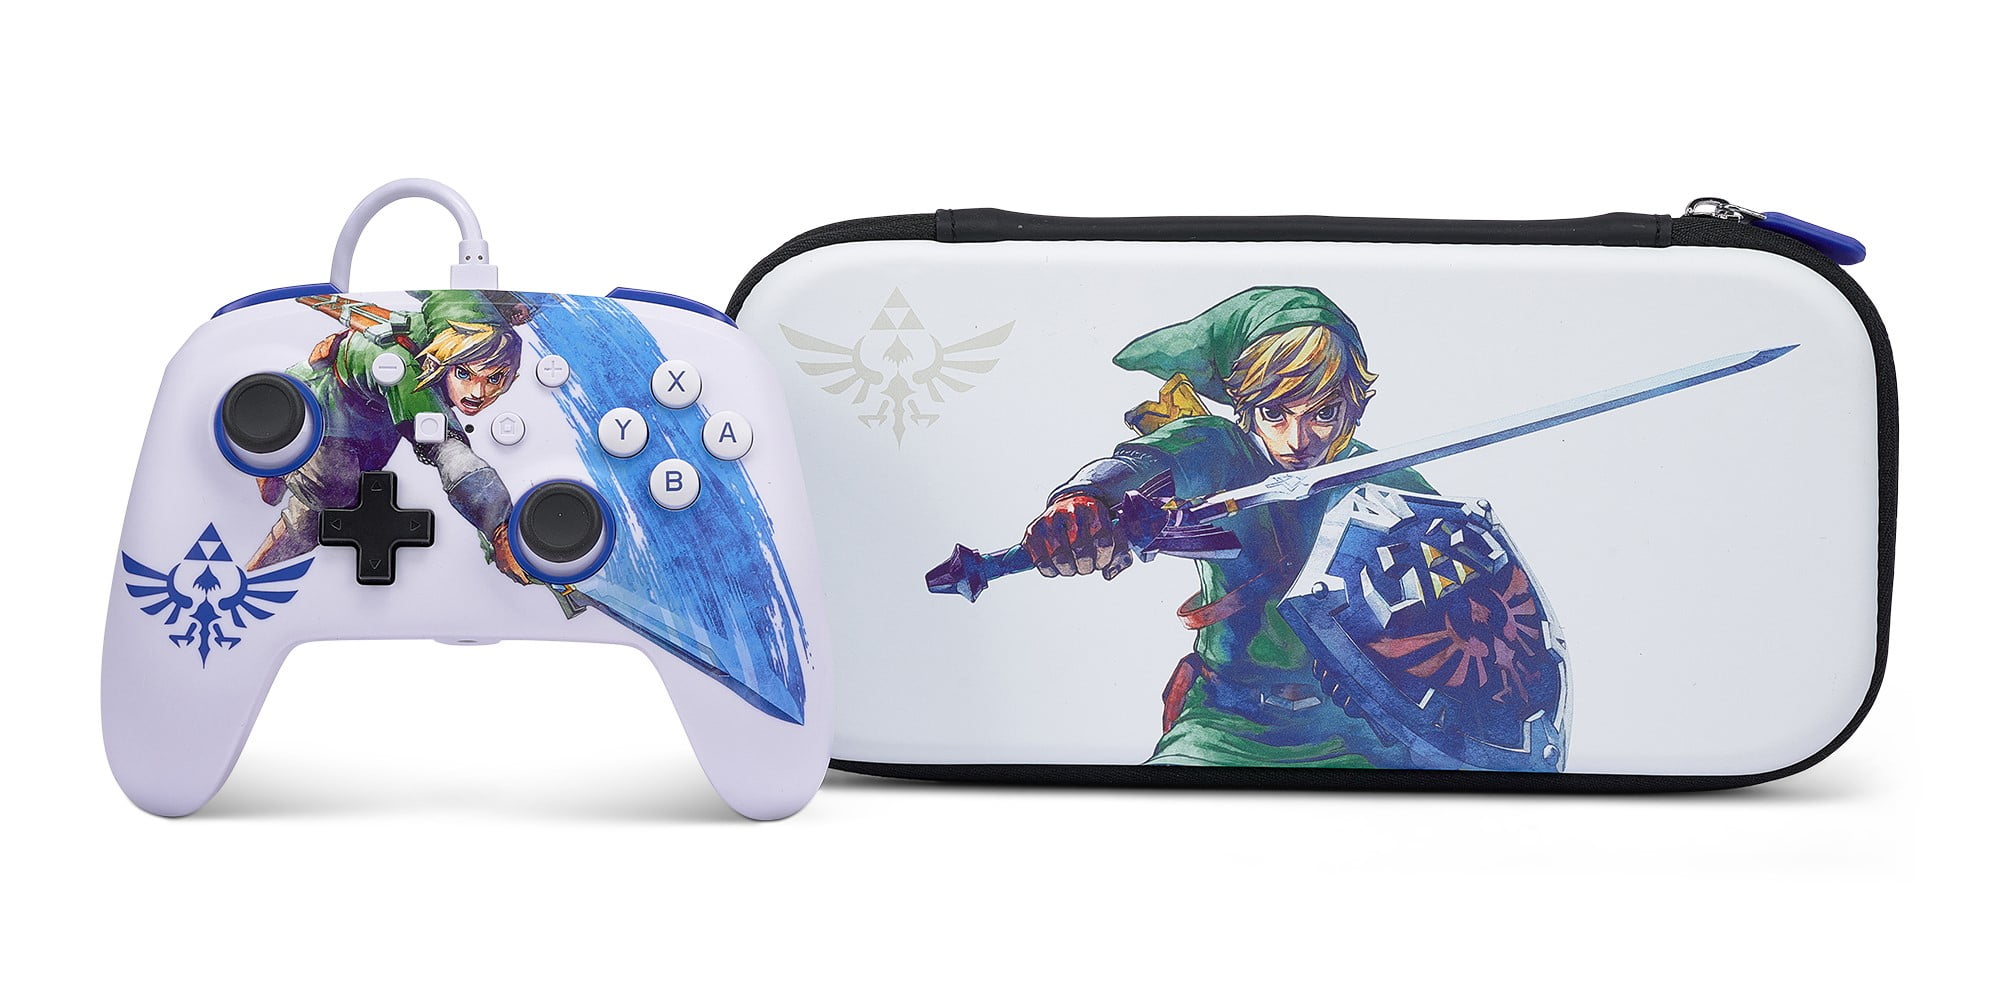 PowerA Enhanced Wired Controller w/ Slim Case for Nintendo Switch (Master Sword) $22